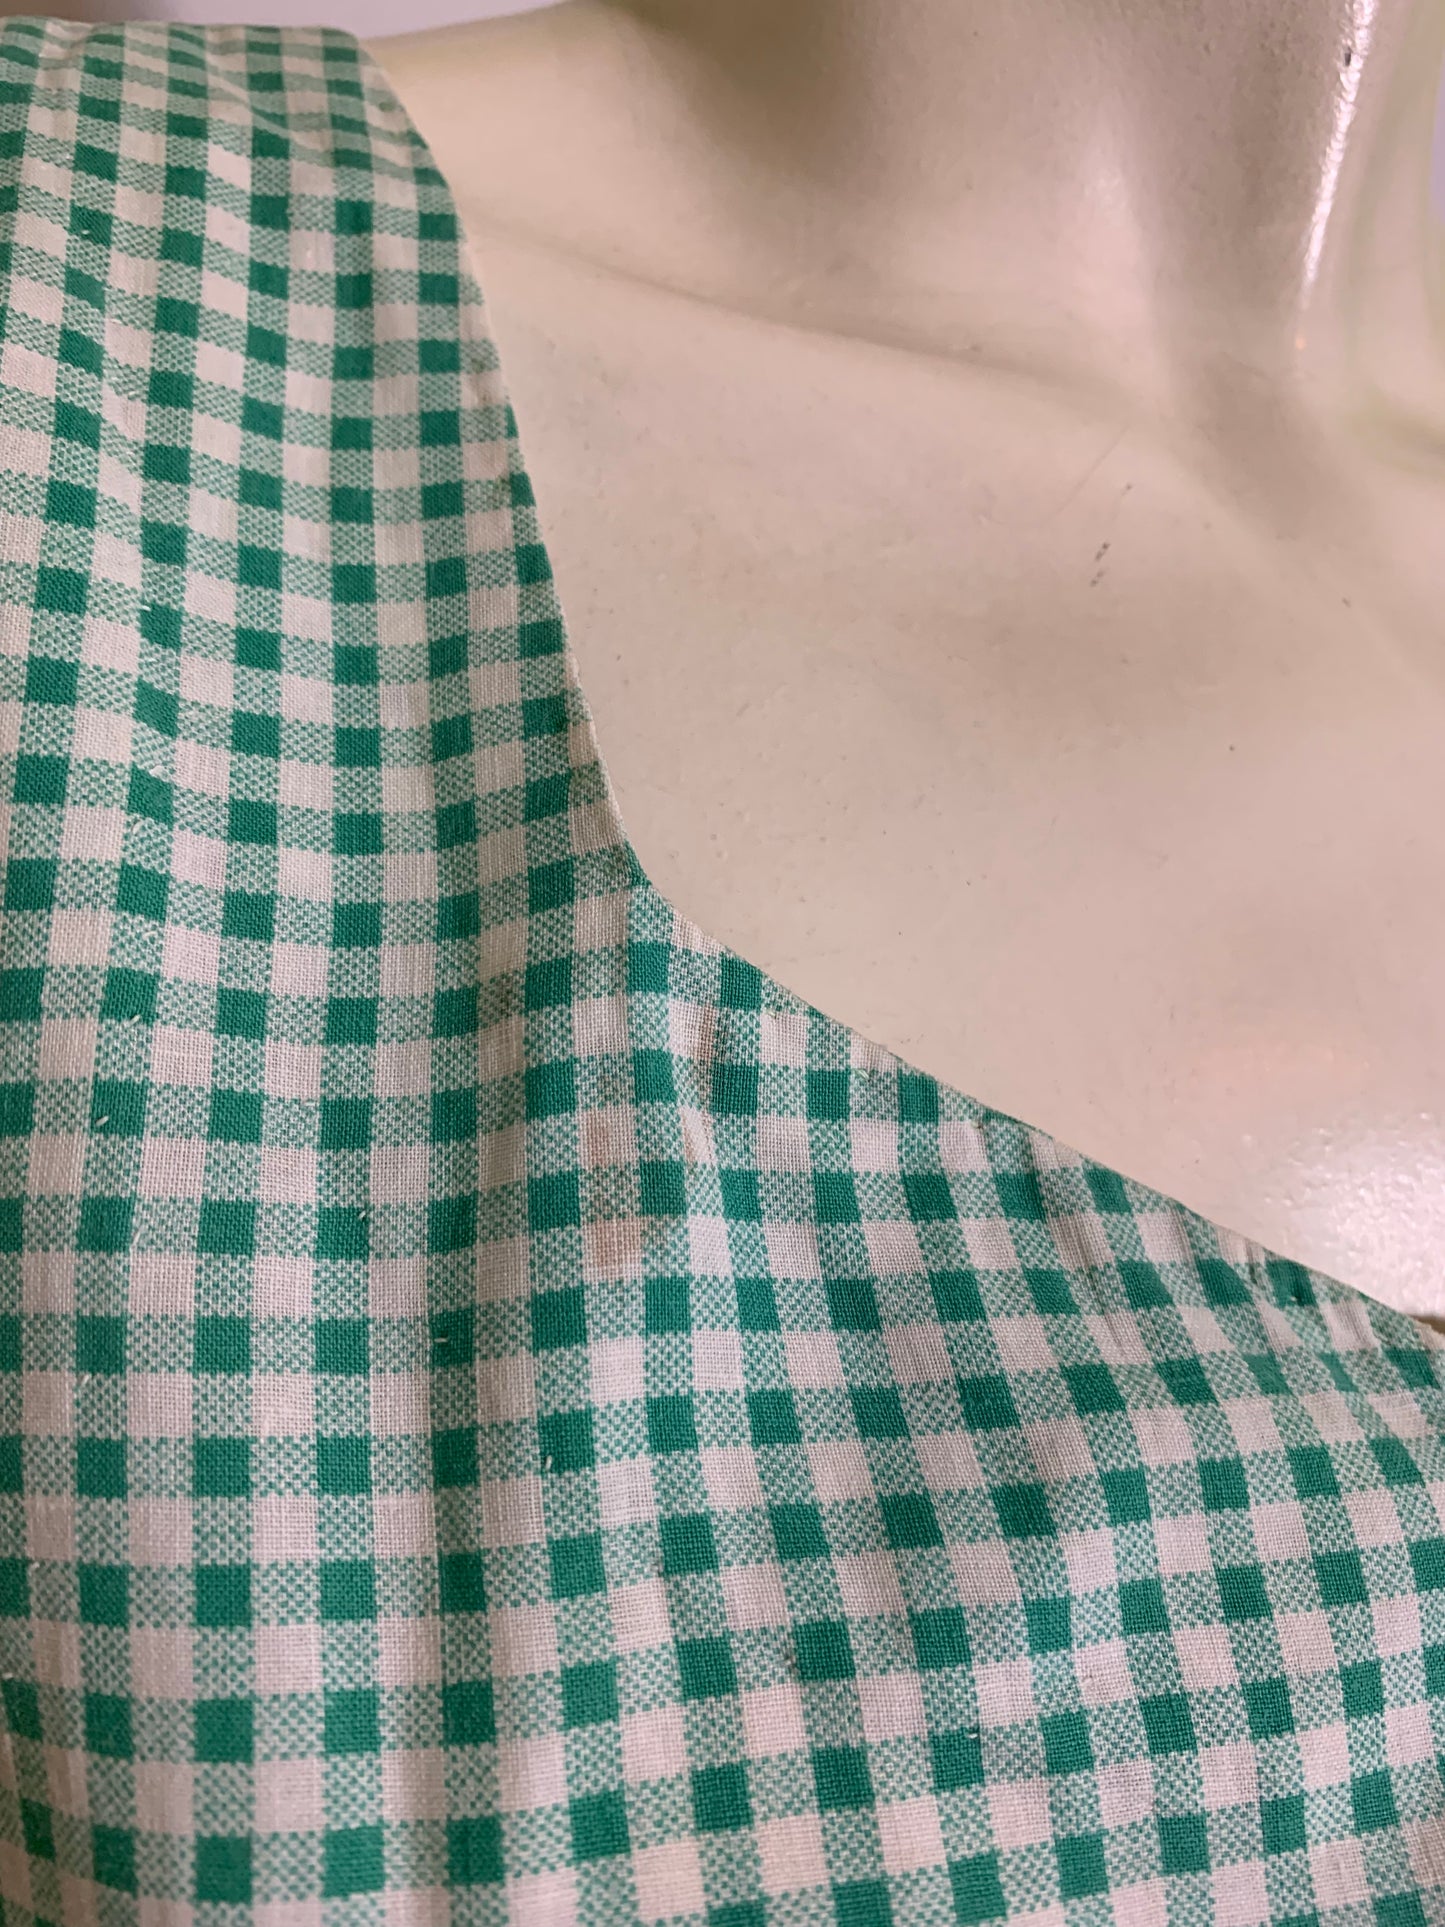 Grassy Green Gingham Cotton Day Dress with Zip Front circa 1940s